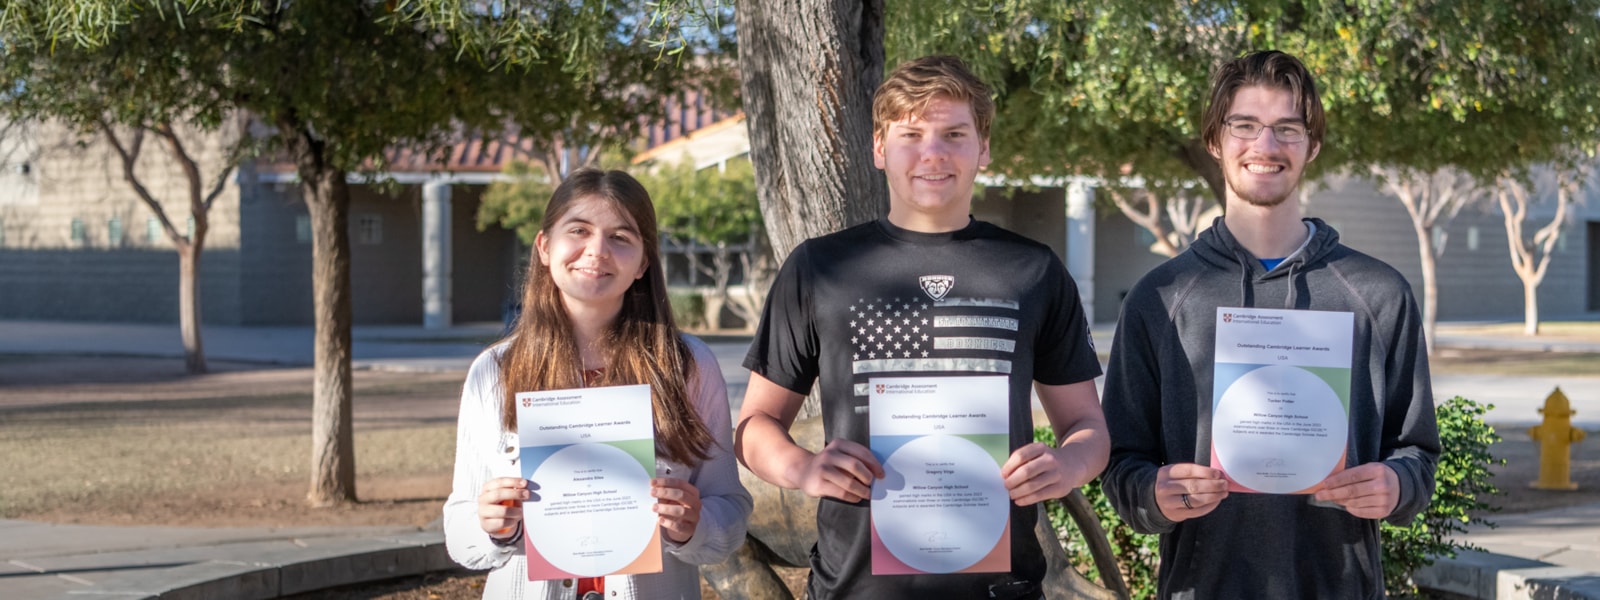 Three students holding their awards